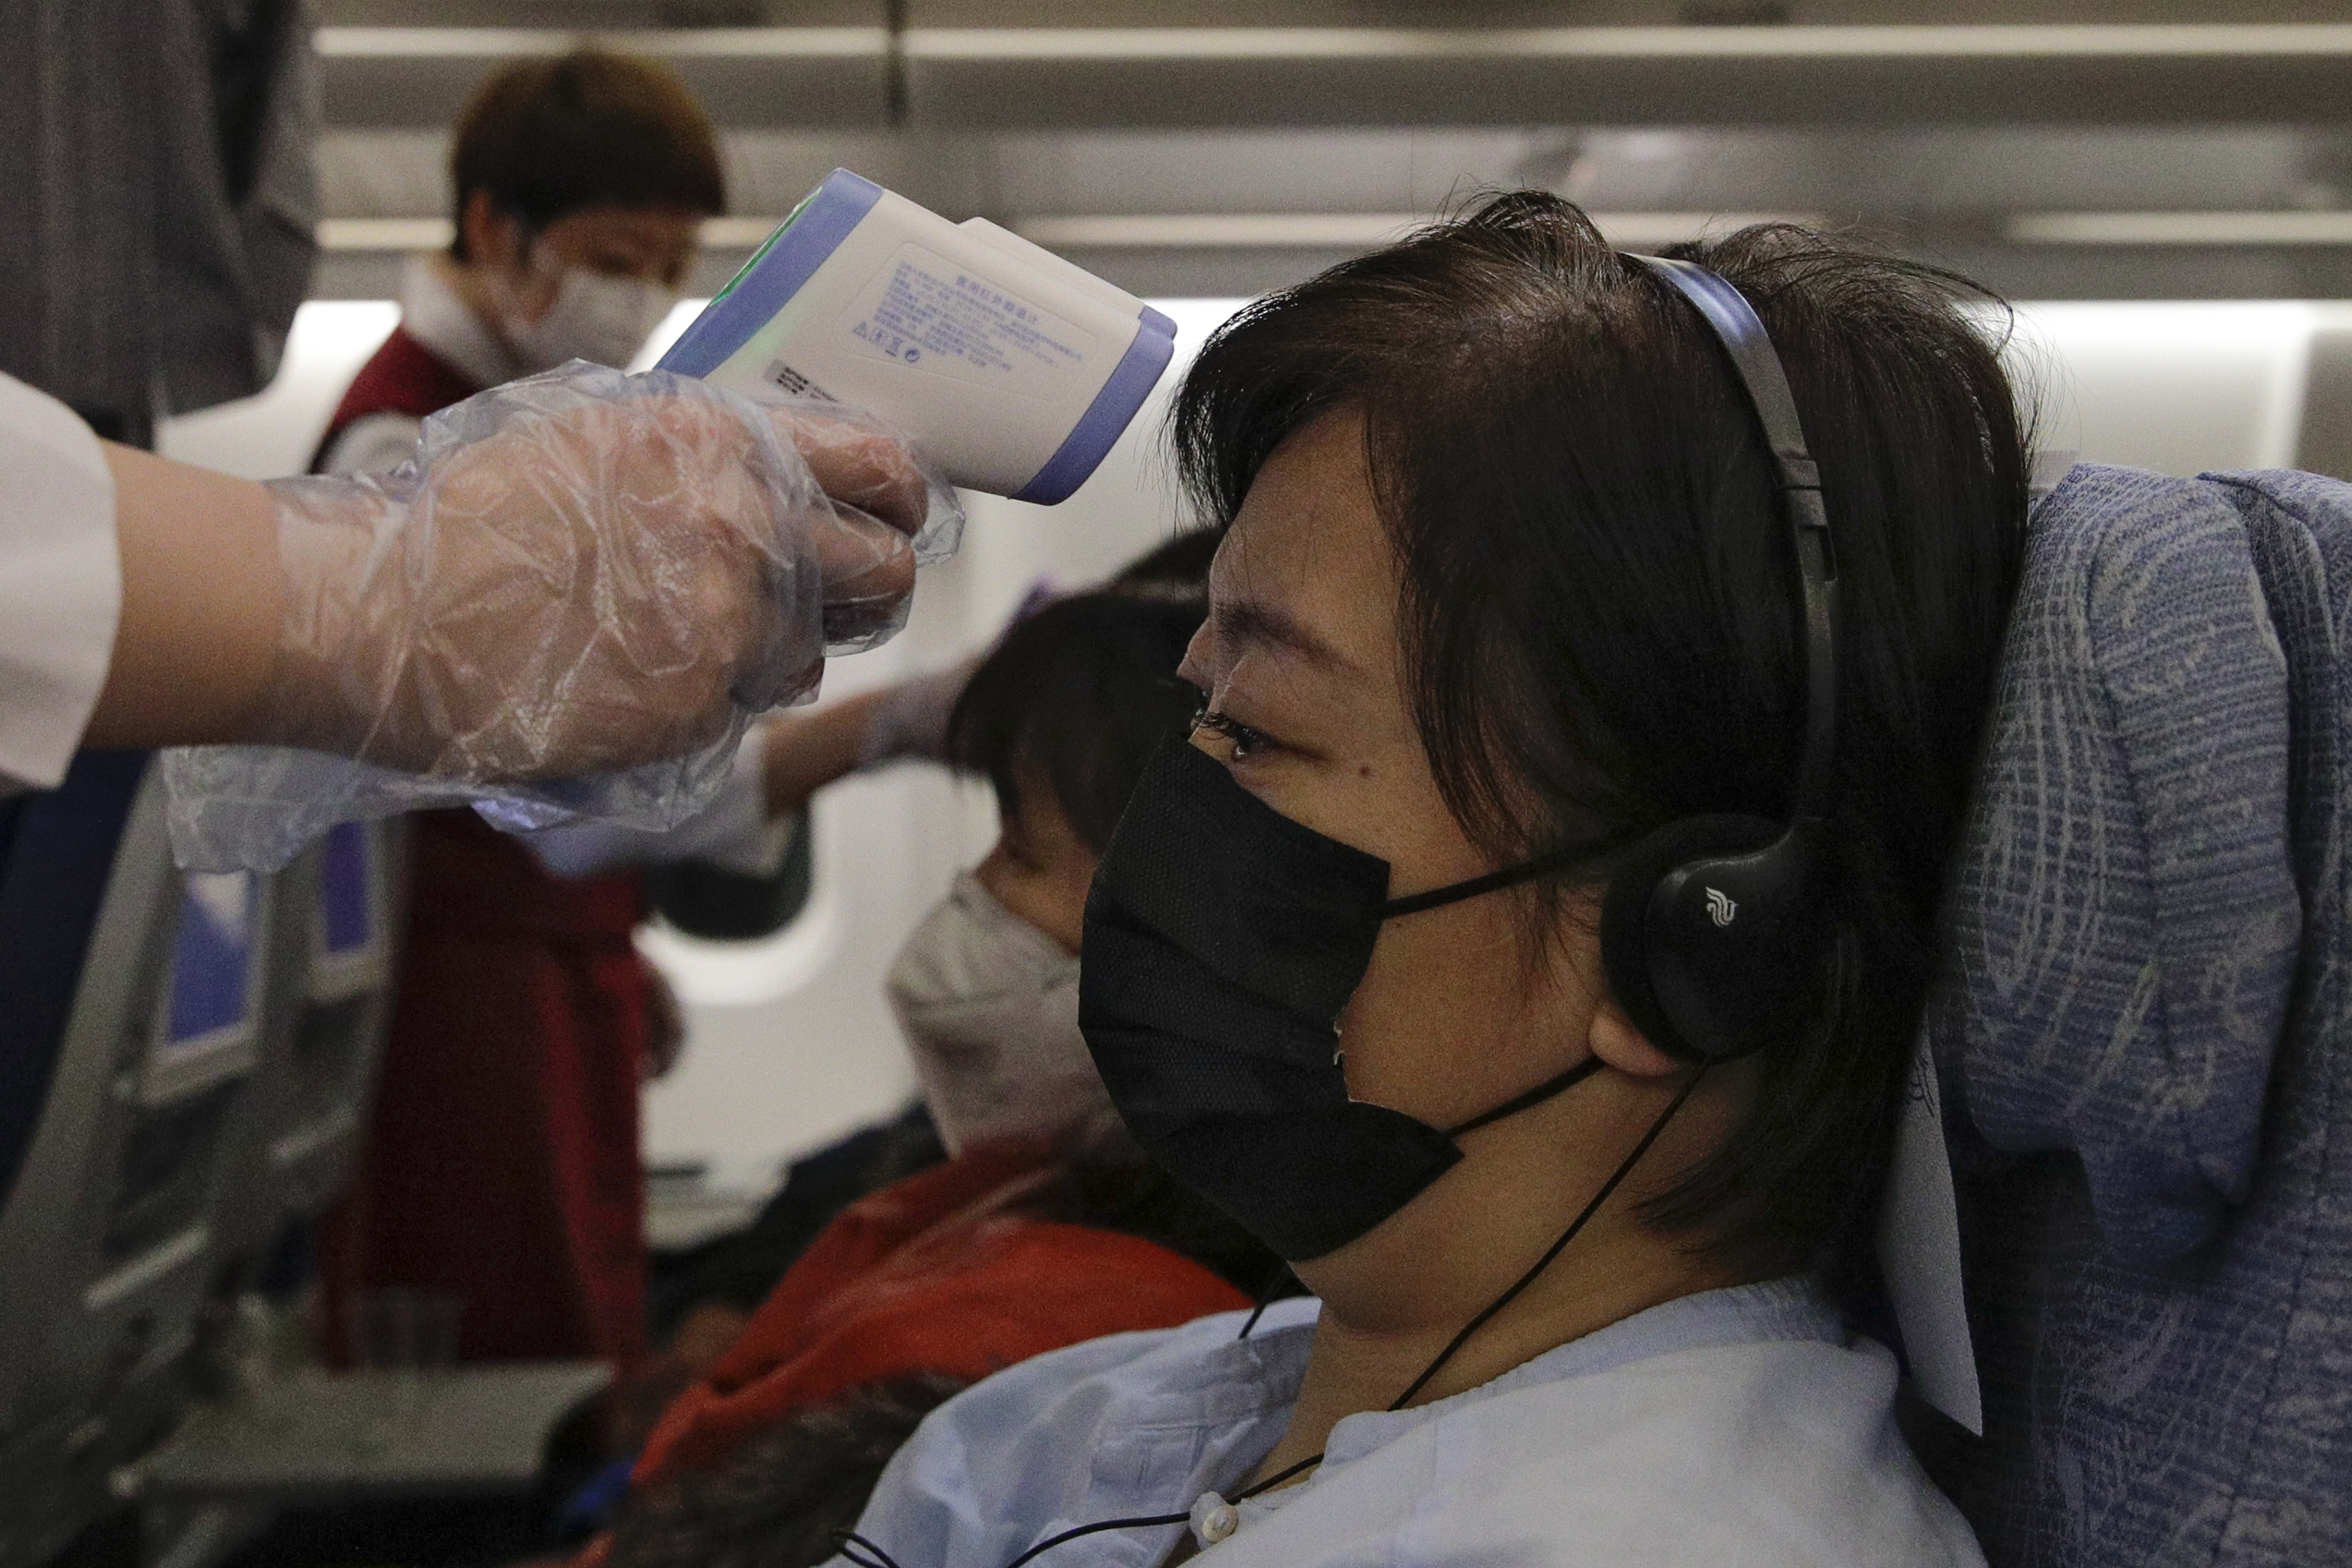 Flight attendants check temperatures of passengers aboard an Air China flight from Melbourne to Beijing on Feb. 4, 2020. AP Photo/Andy Wong